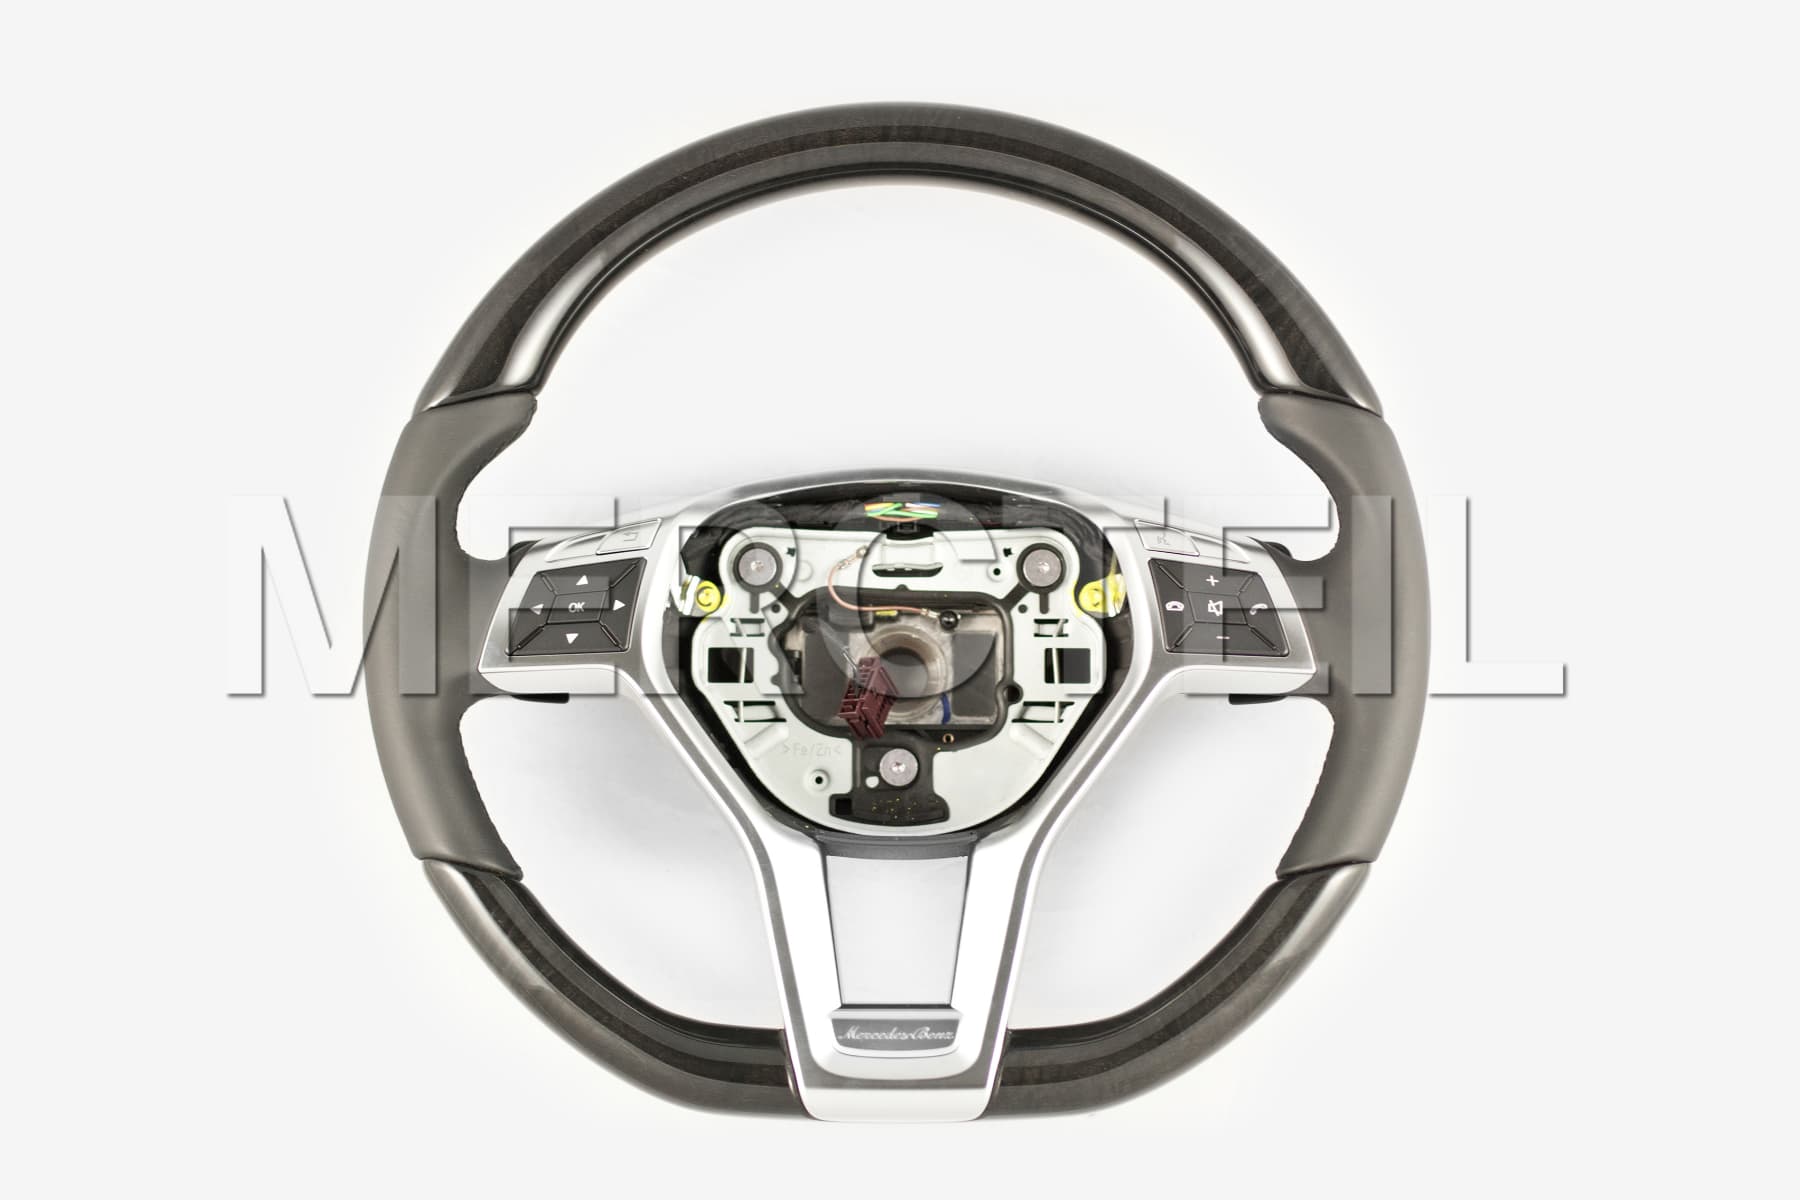 Mercedes-Benz Steering Wheel With Ash Tree Veneer for SL-Class (part number: A23146024039E38)